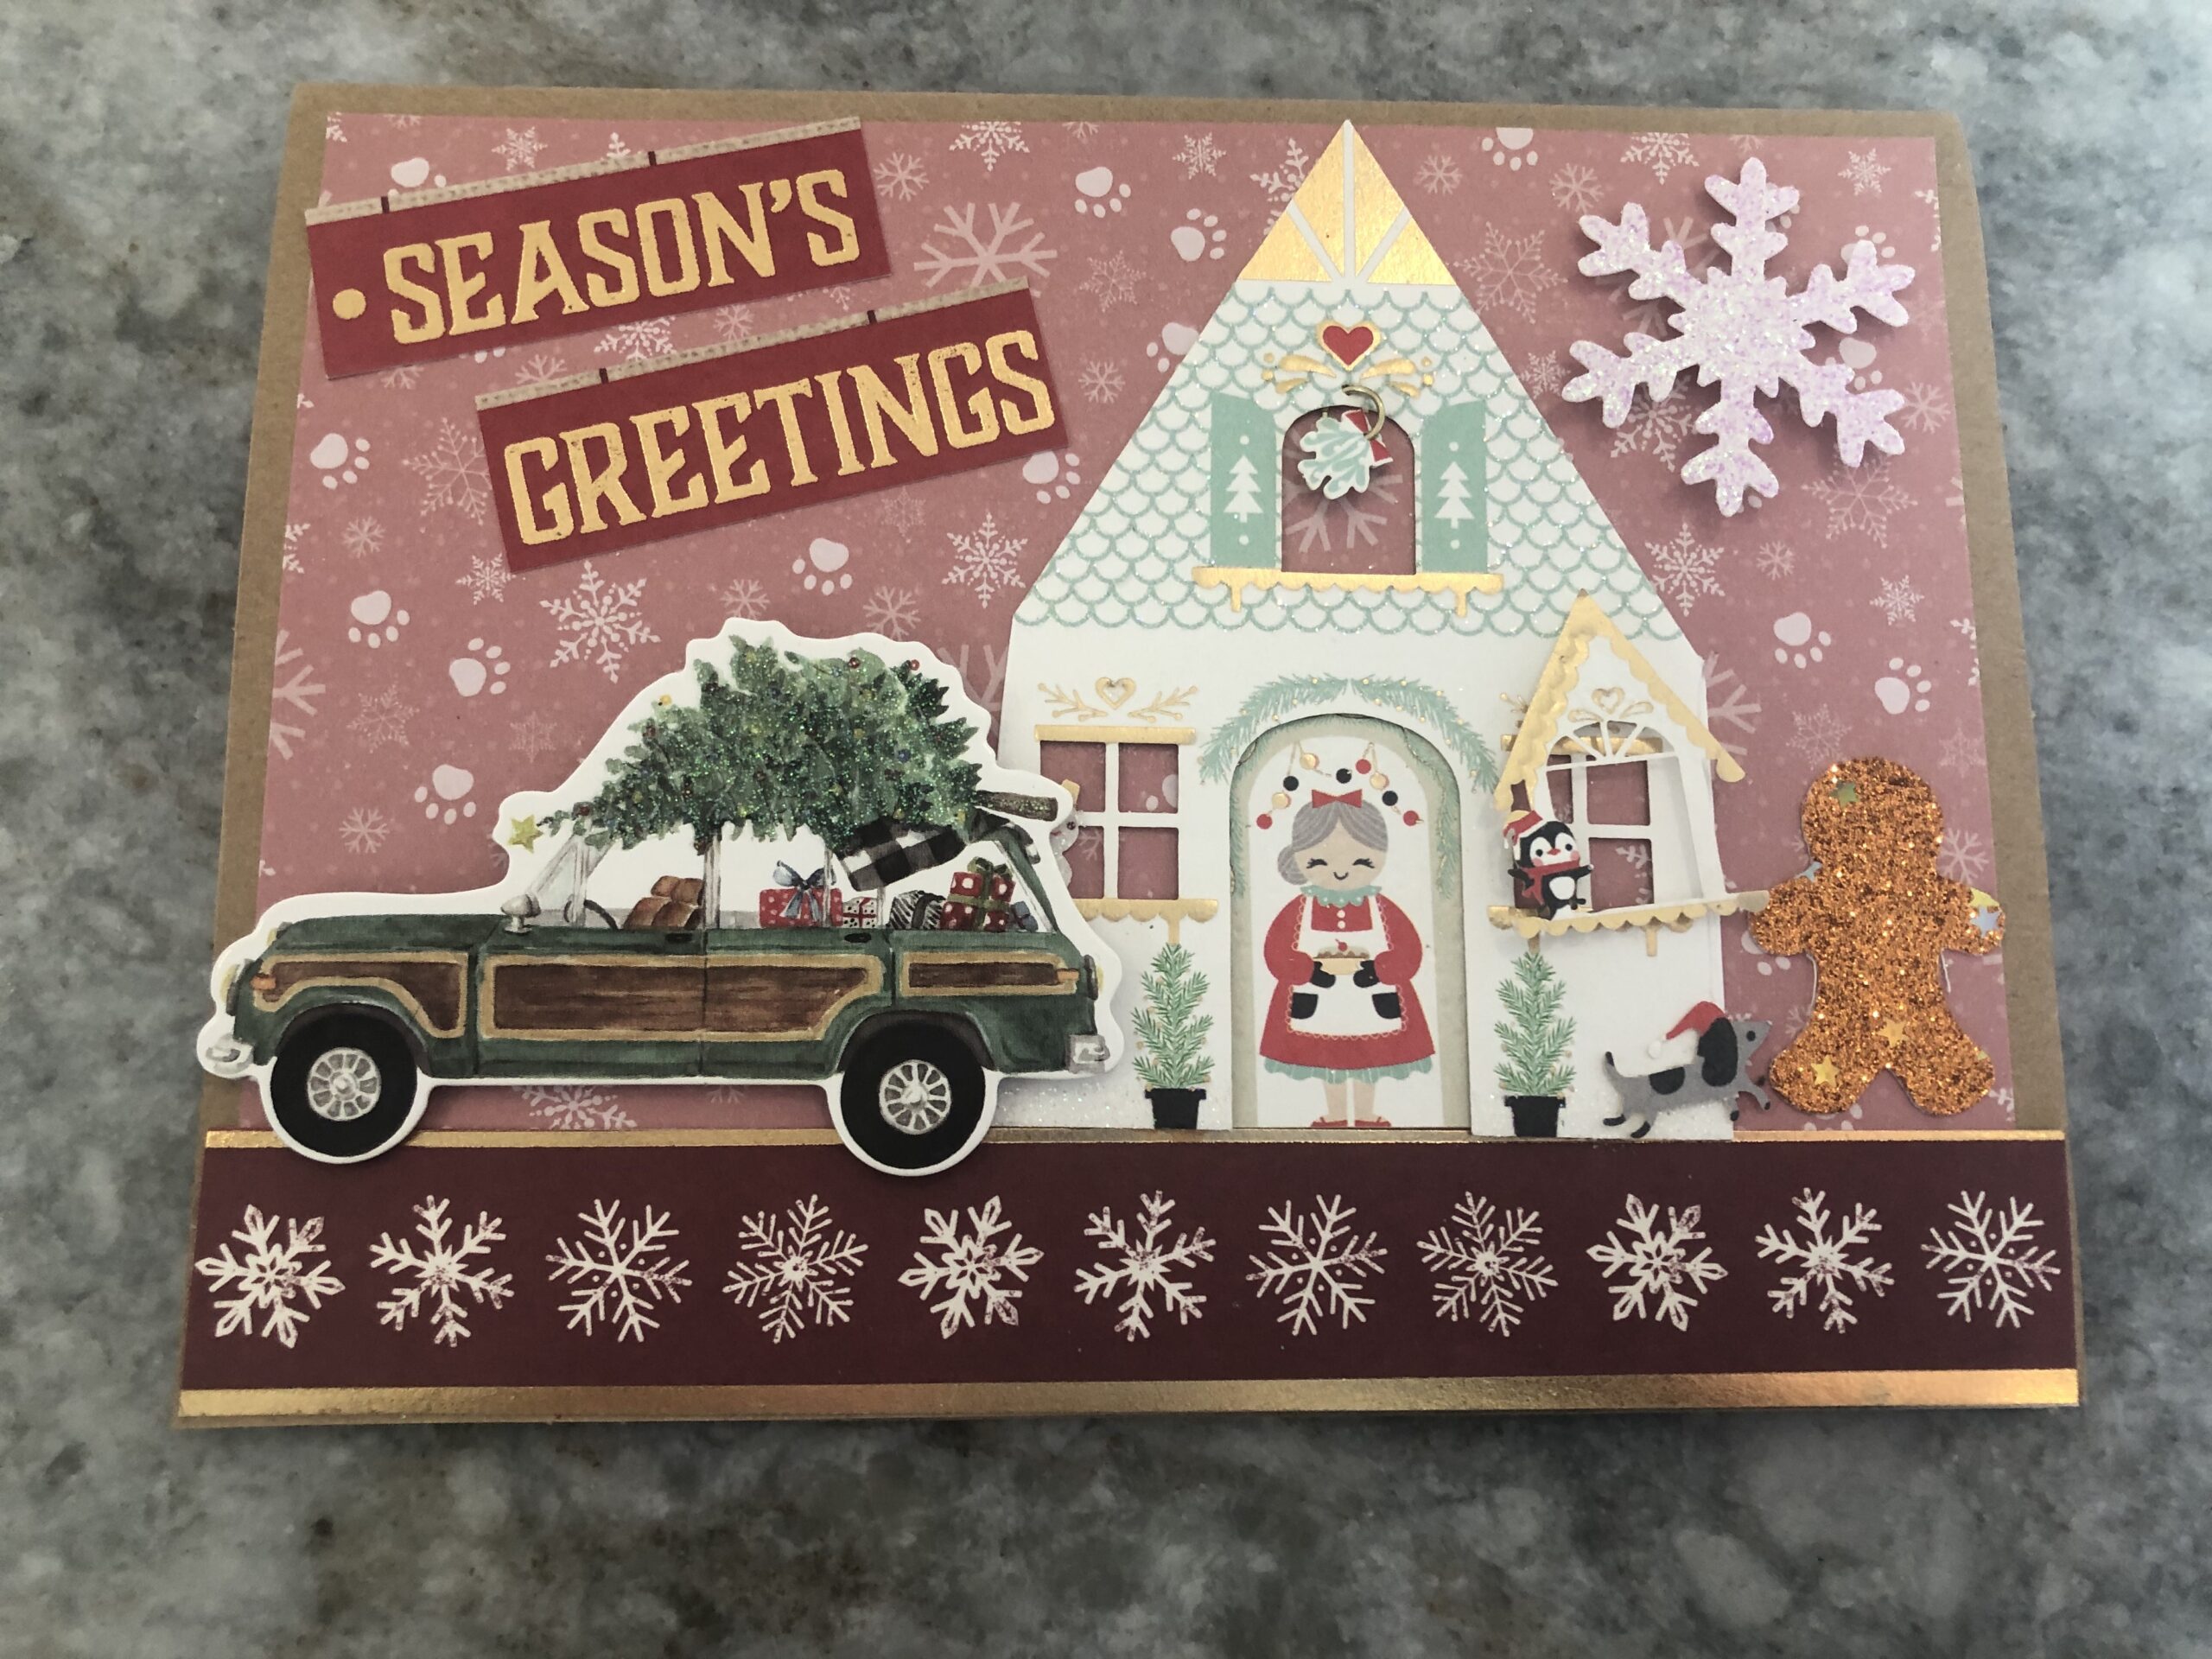 Home made Christmas card using recycled materials... features a car with a wreath on it, a house decorated, and "seasons greetings"